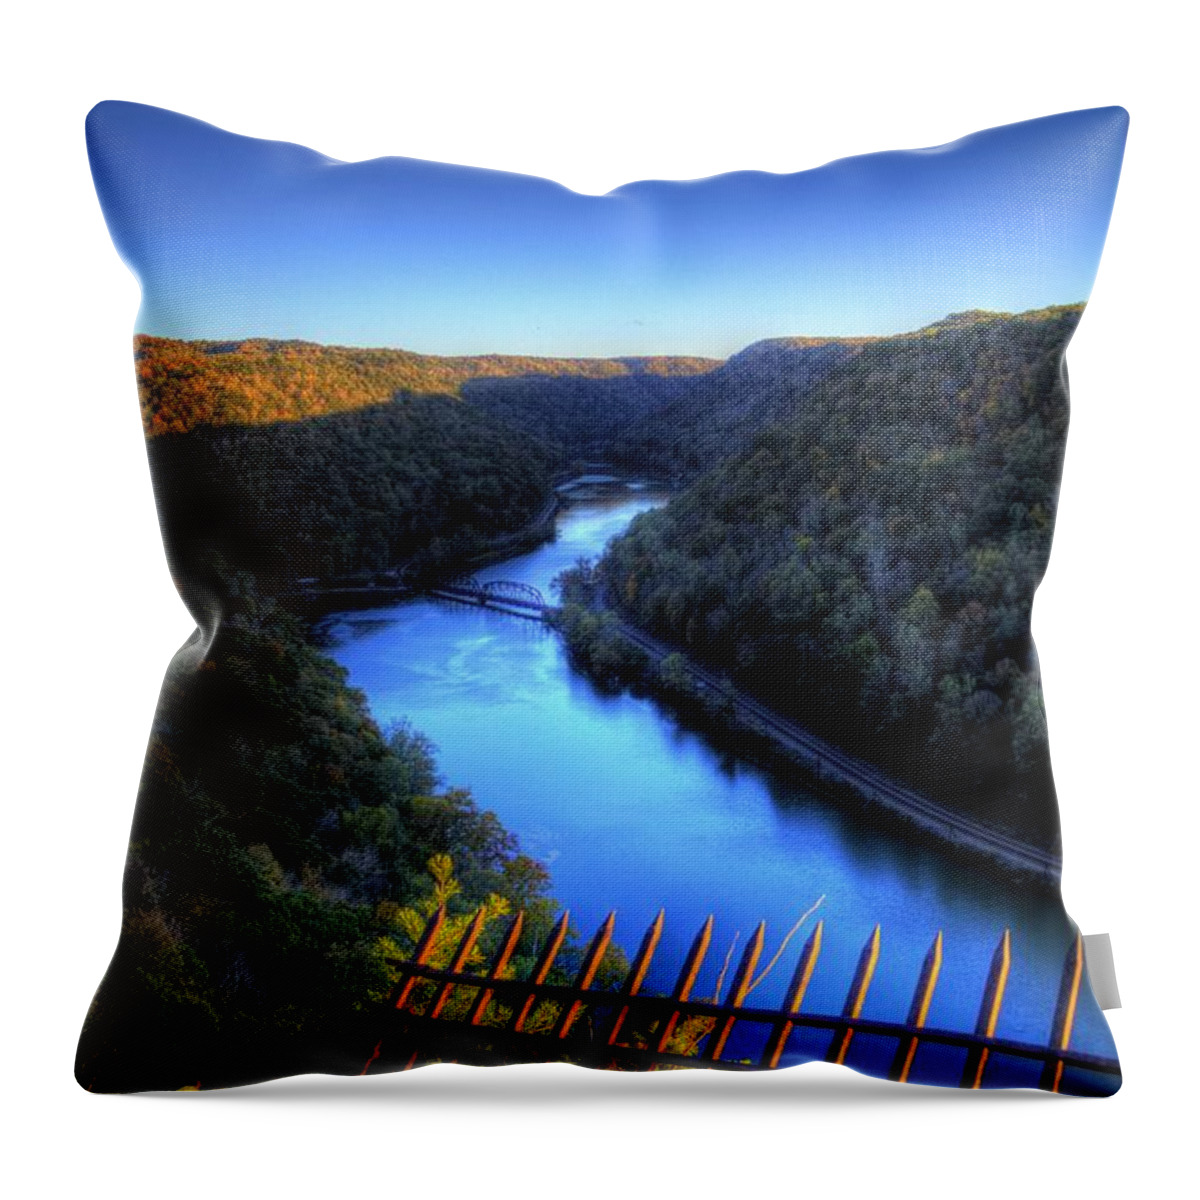 River Throw Pillow featuring the photograph River through a Valley by Jonny D